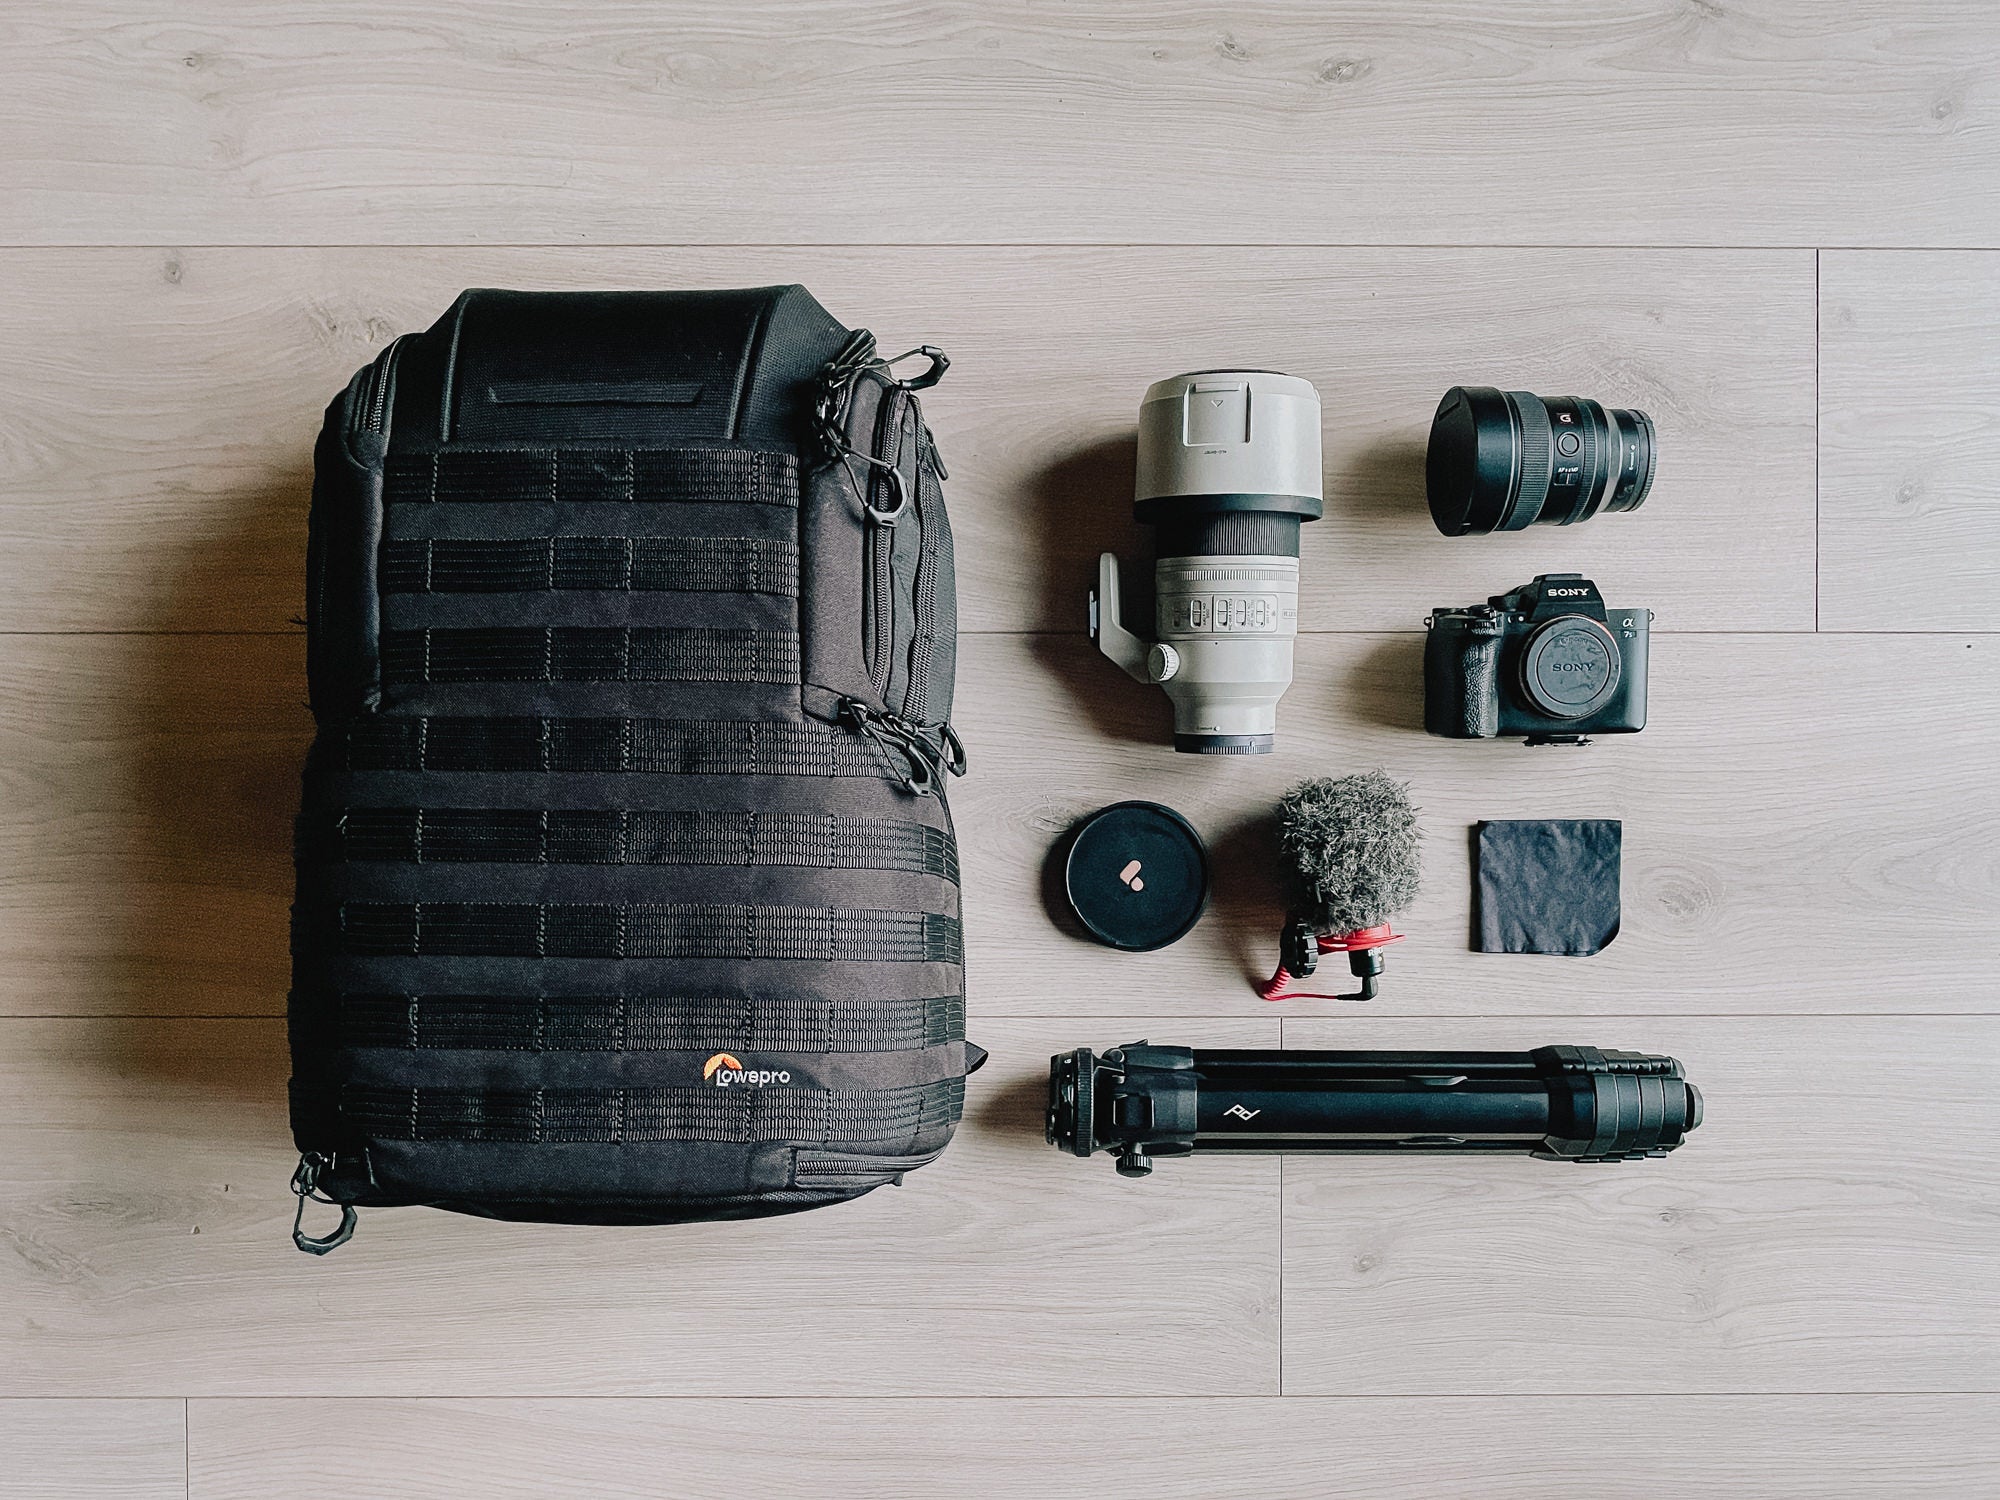 Titouan Le Roux's kit for photo and video while thru-hiking